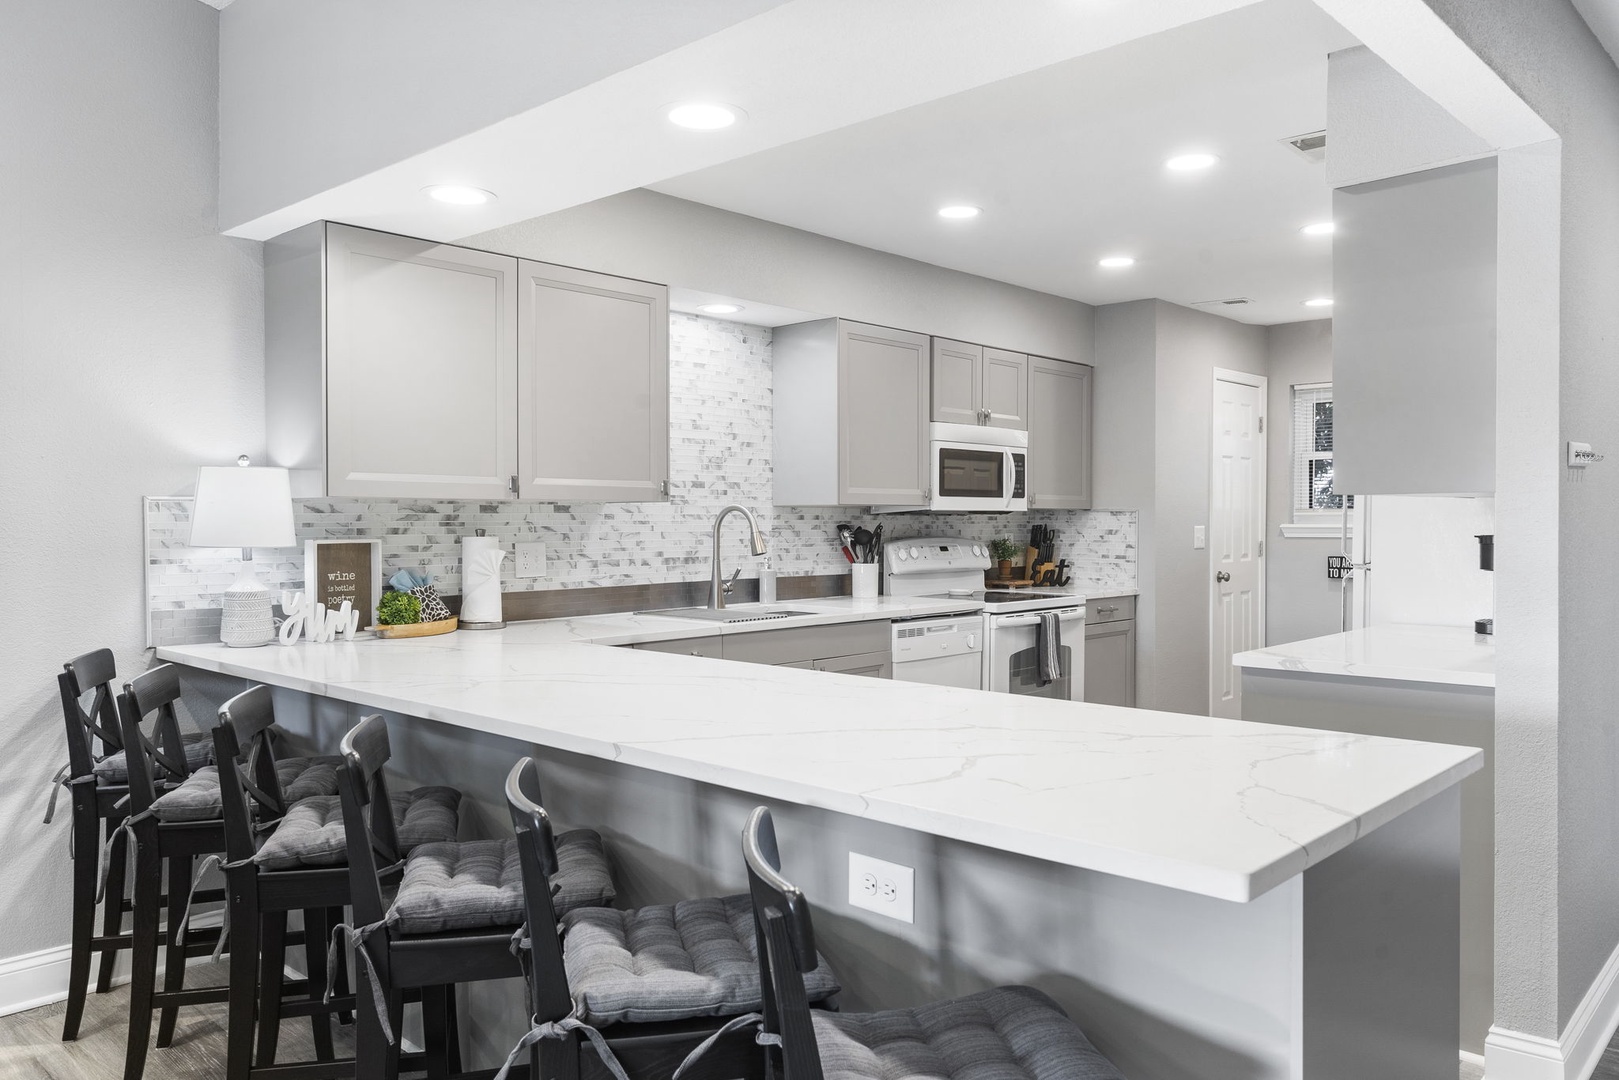 Unit 20: Sip morning coffee or grab a bite at the kitchen counter, with room for 6